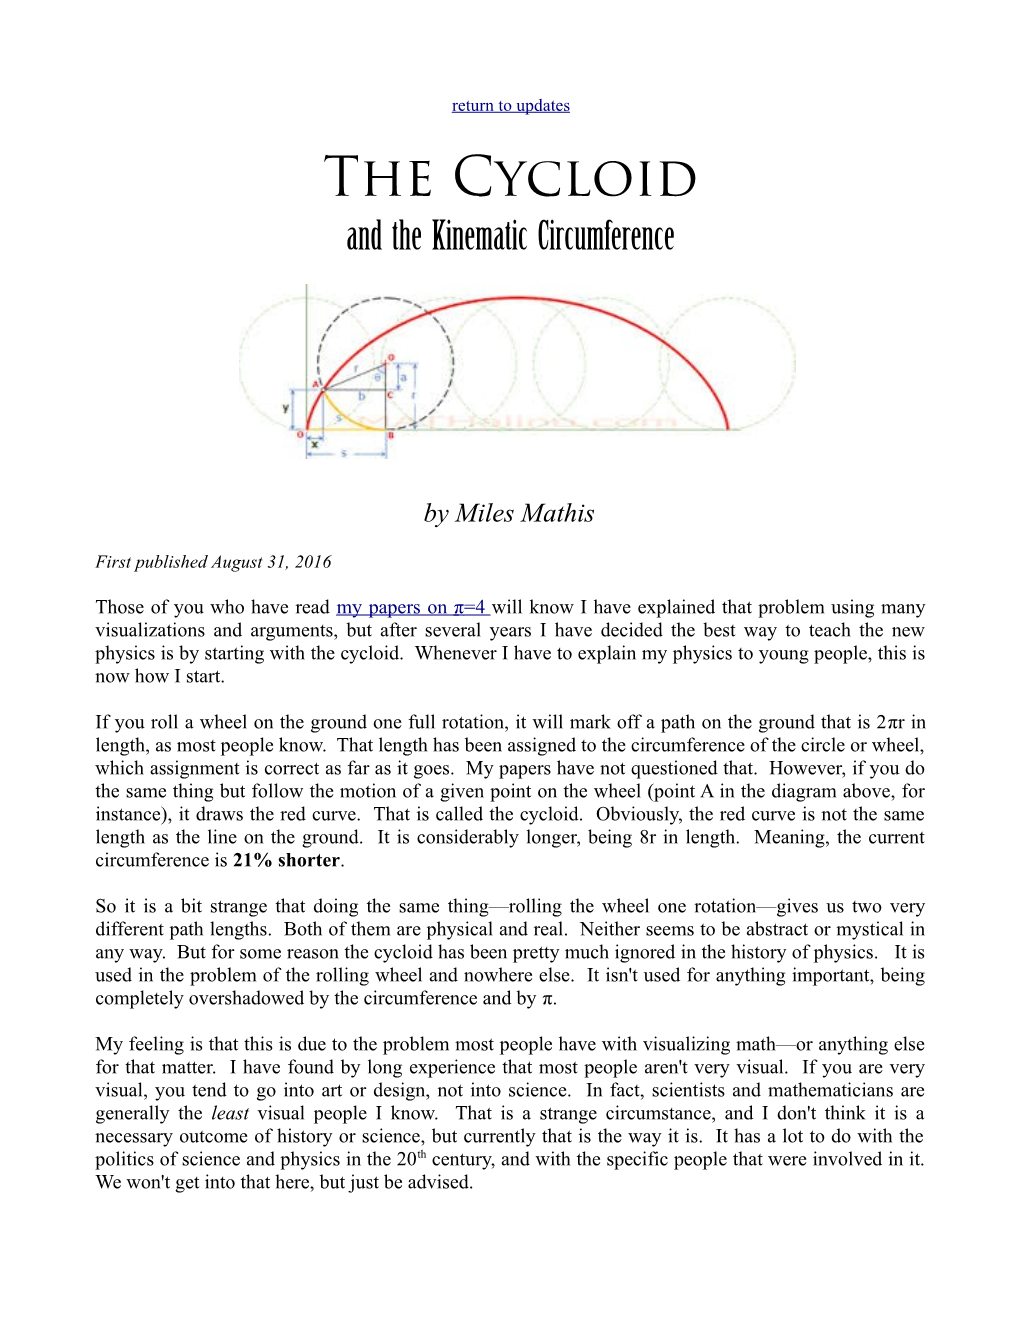 The Cycloid and the Kinematic Circumference